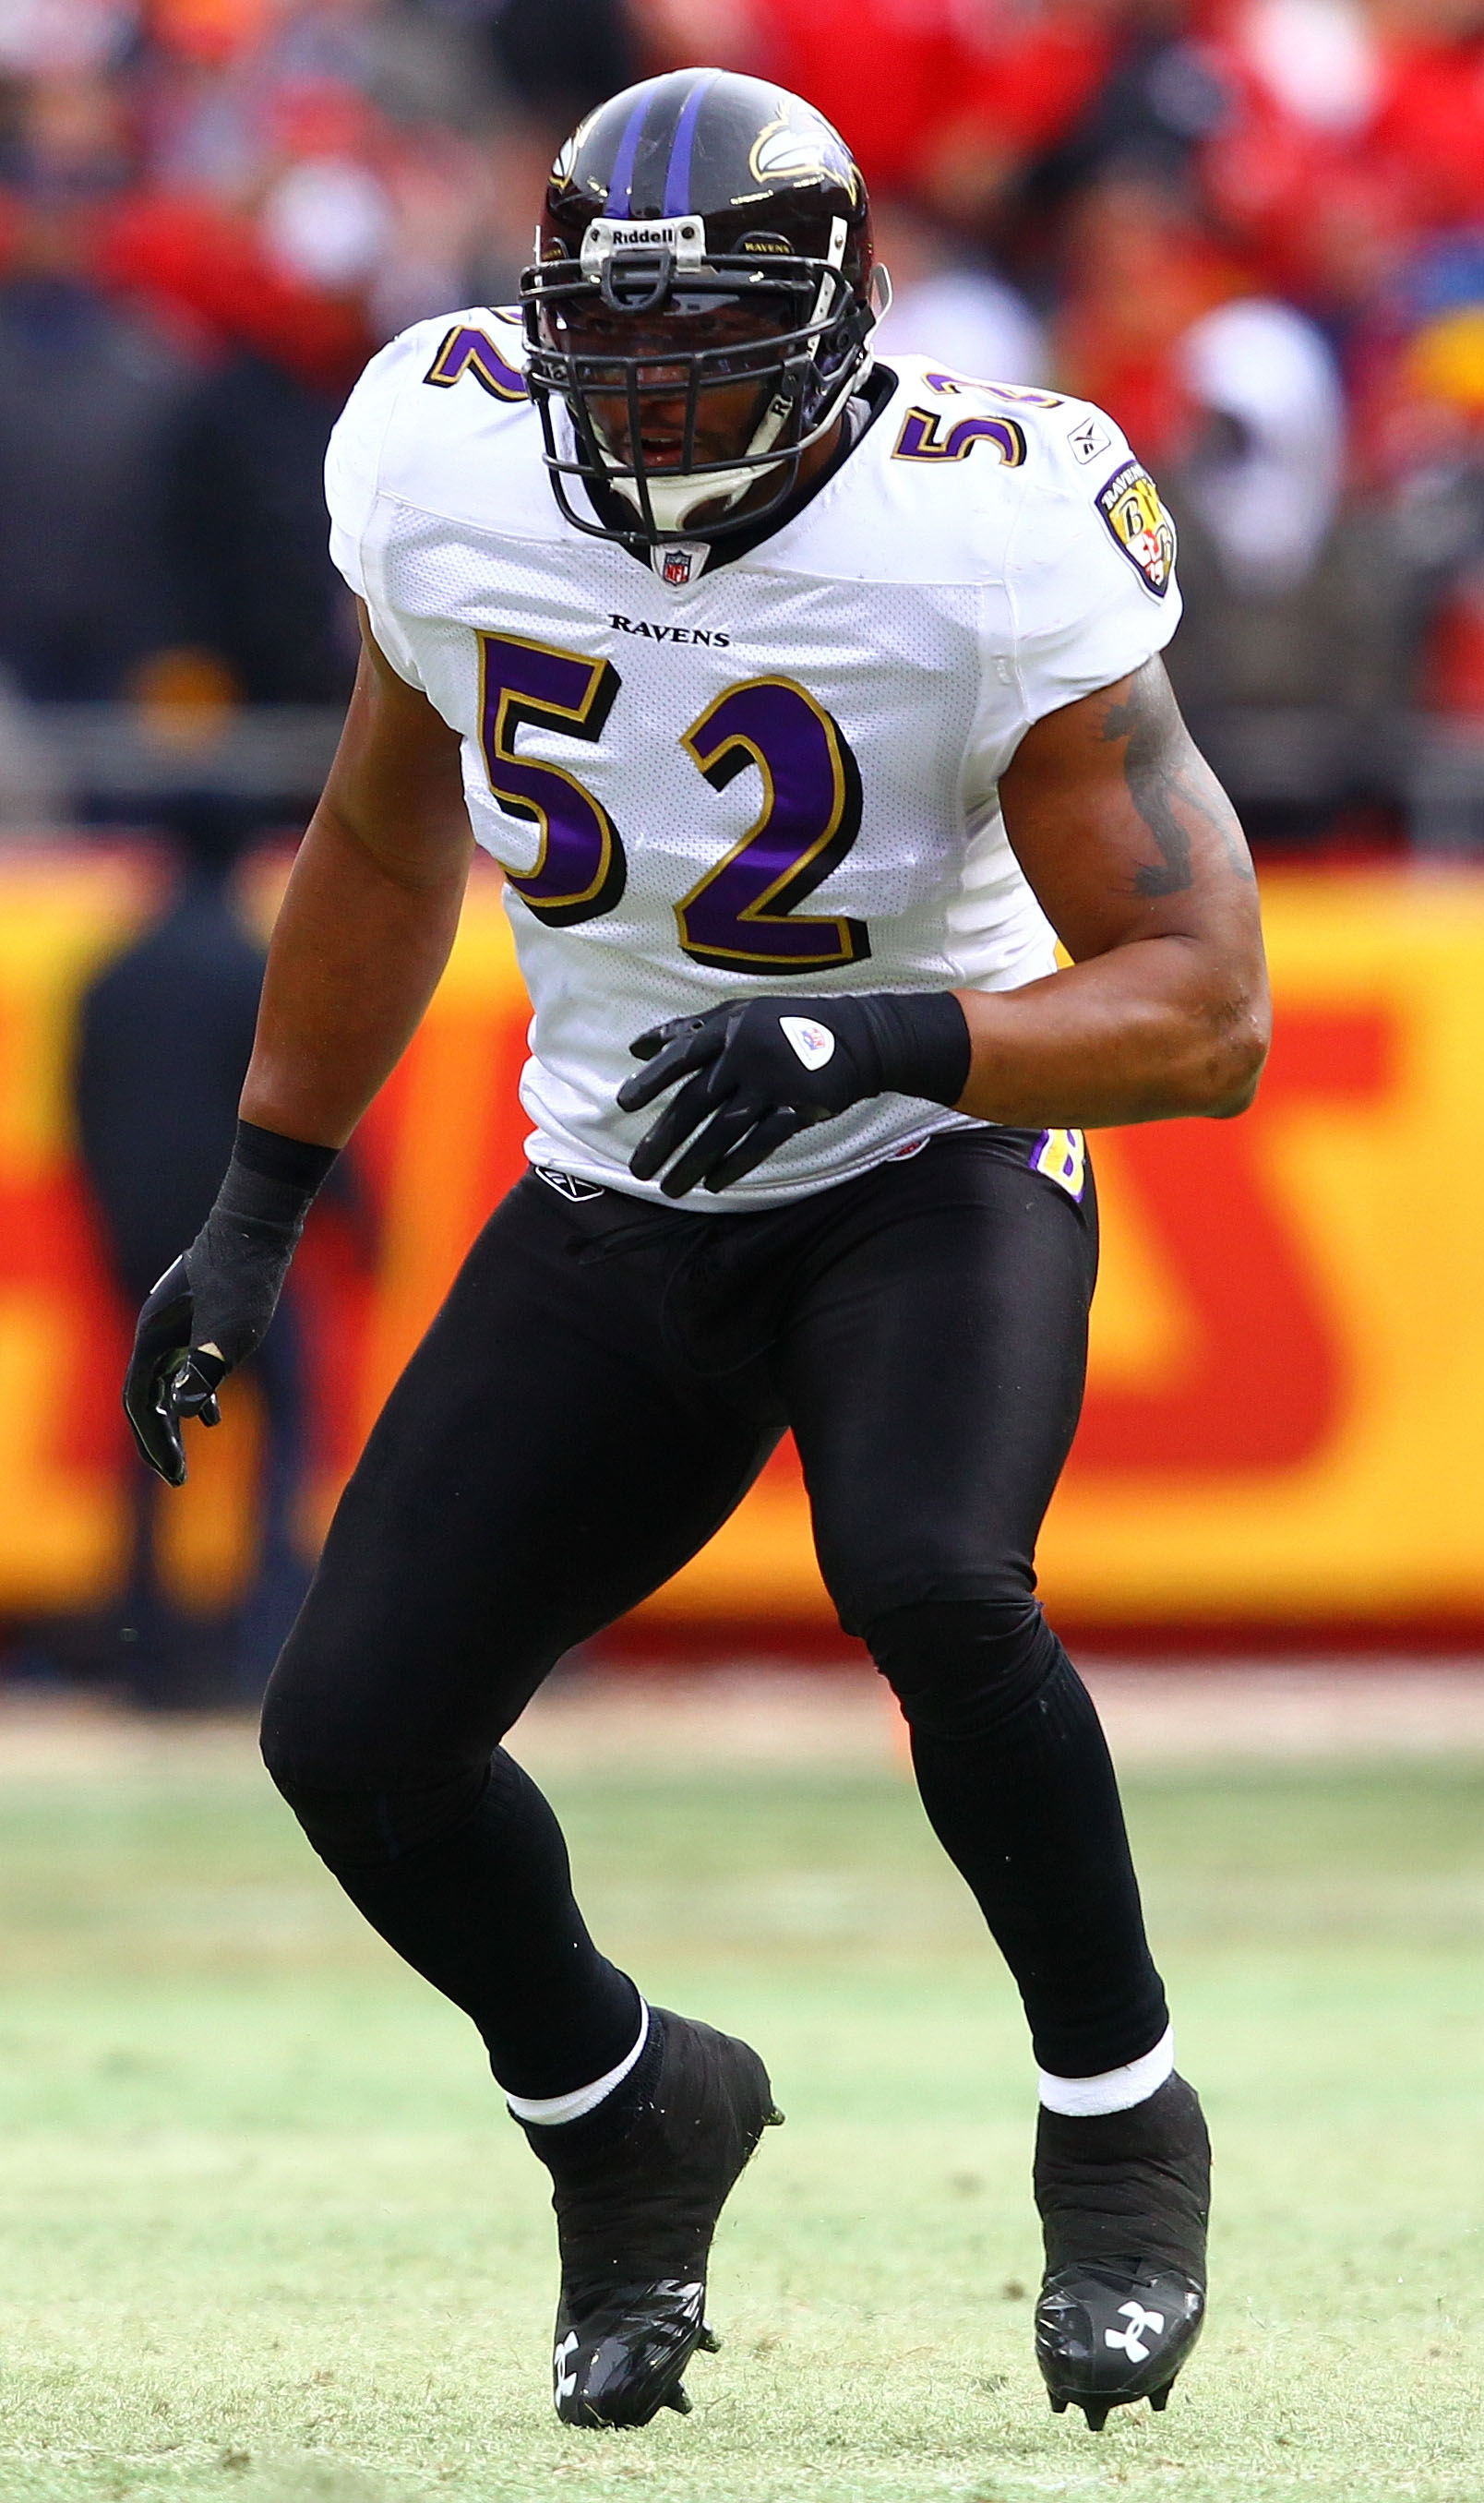 KANSAS CITY, MO - JANUARY 09:  Linebacker Ray Lewis #52 of the Baltimore Ravens reads the play in 2011 AFC wild card playoff game against the Kansas City Chiefs at Arrowhead Stadium on January 9, 2011 in Kansas City, Missouri.  (Photo by Dilip Vishwanat/G